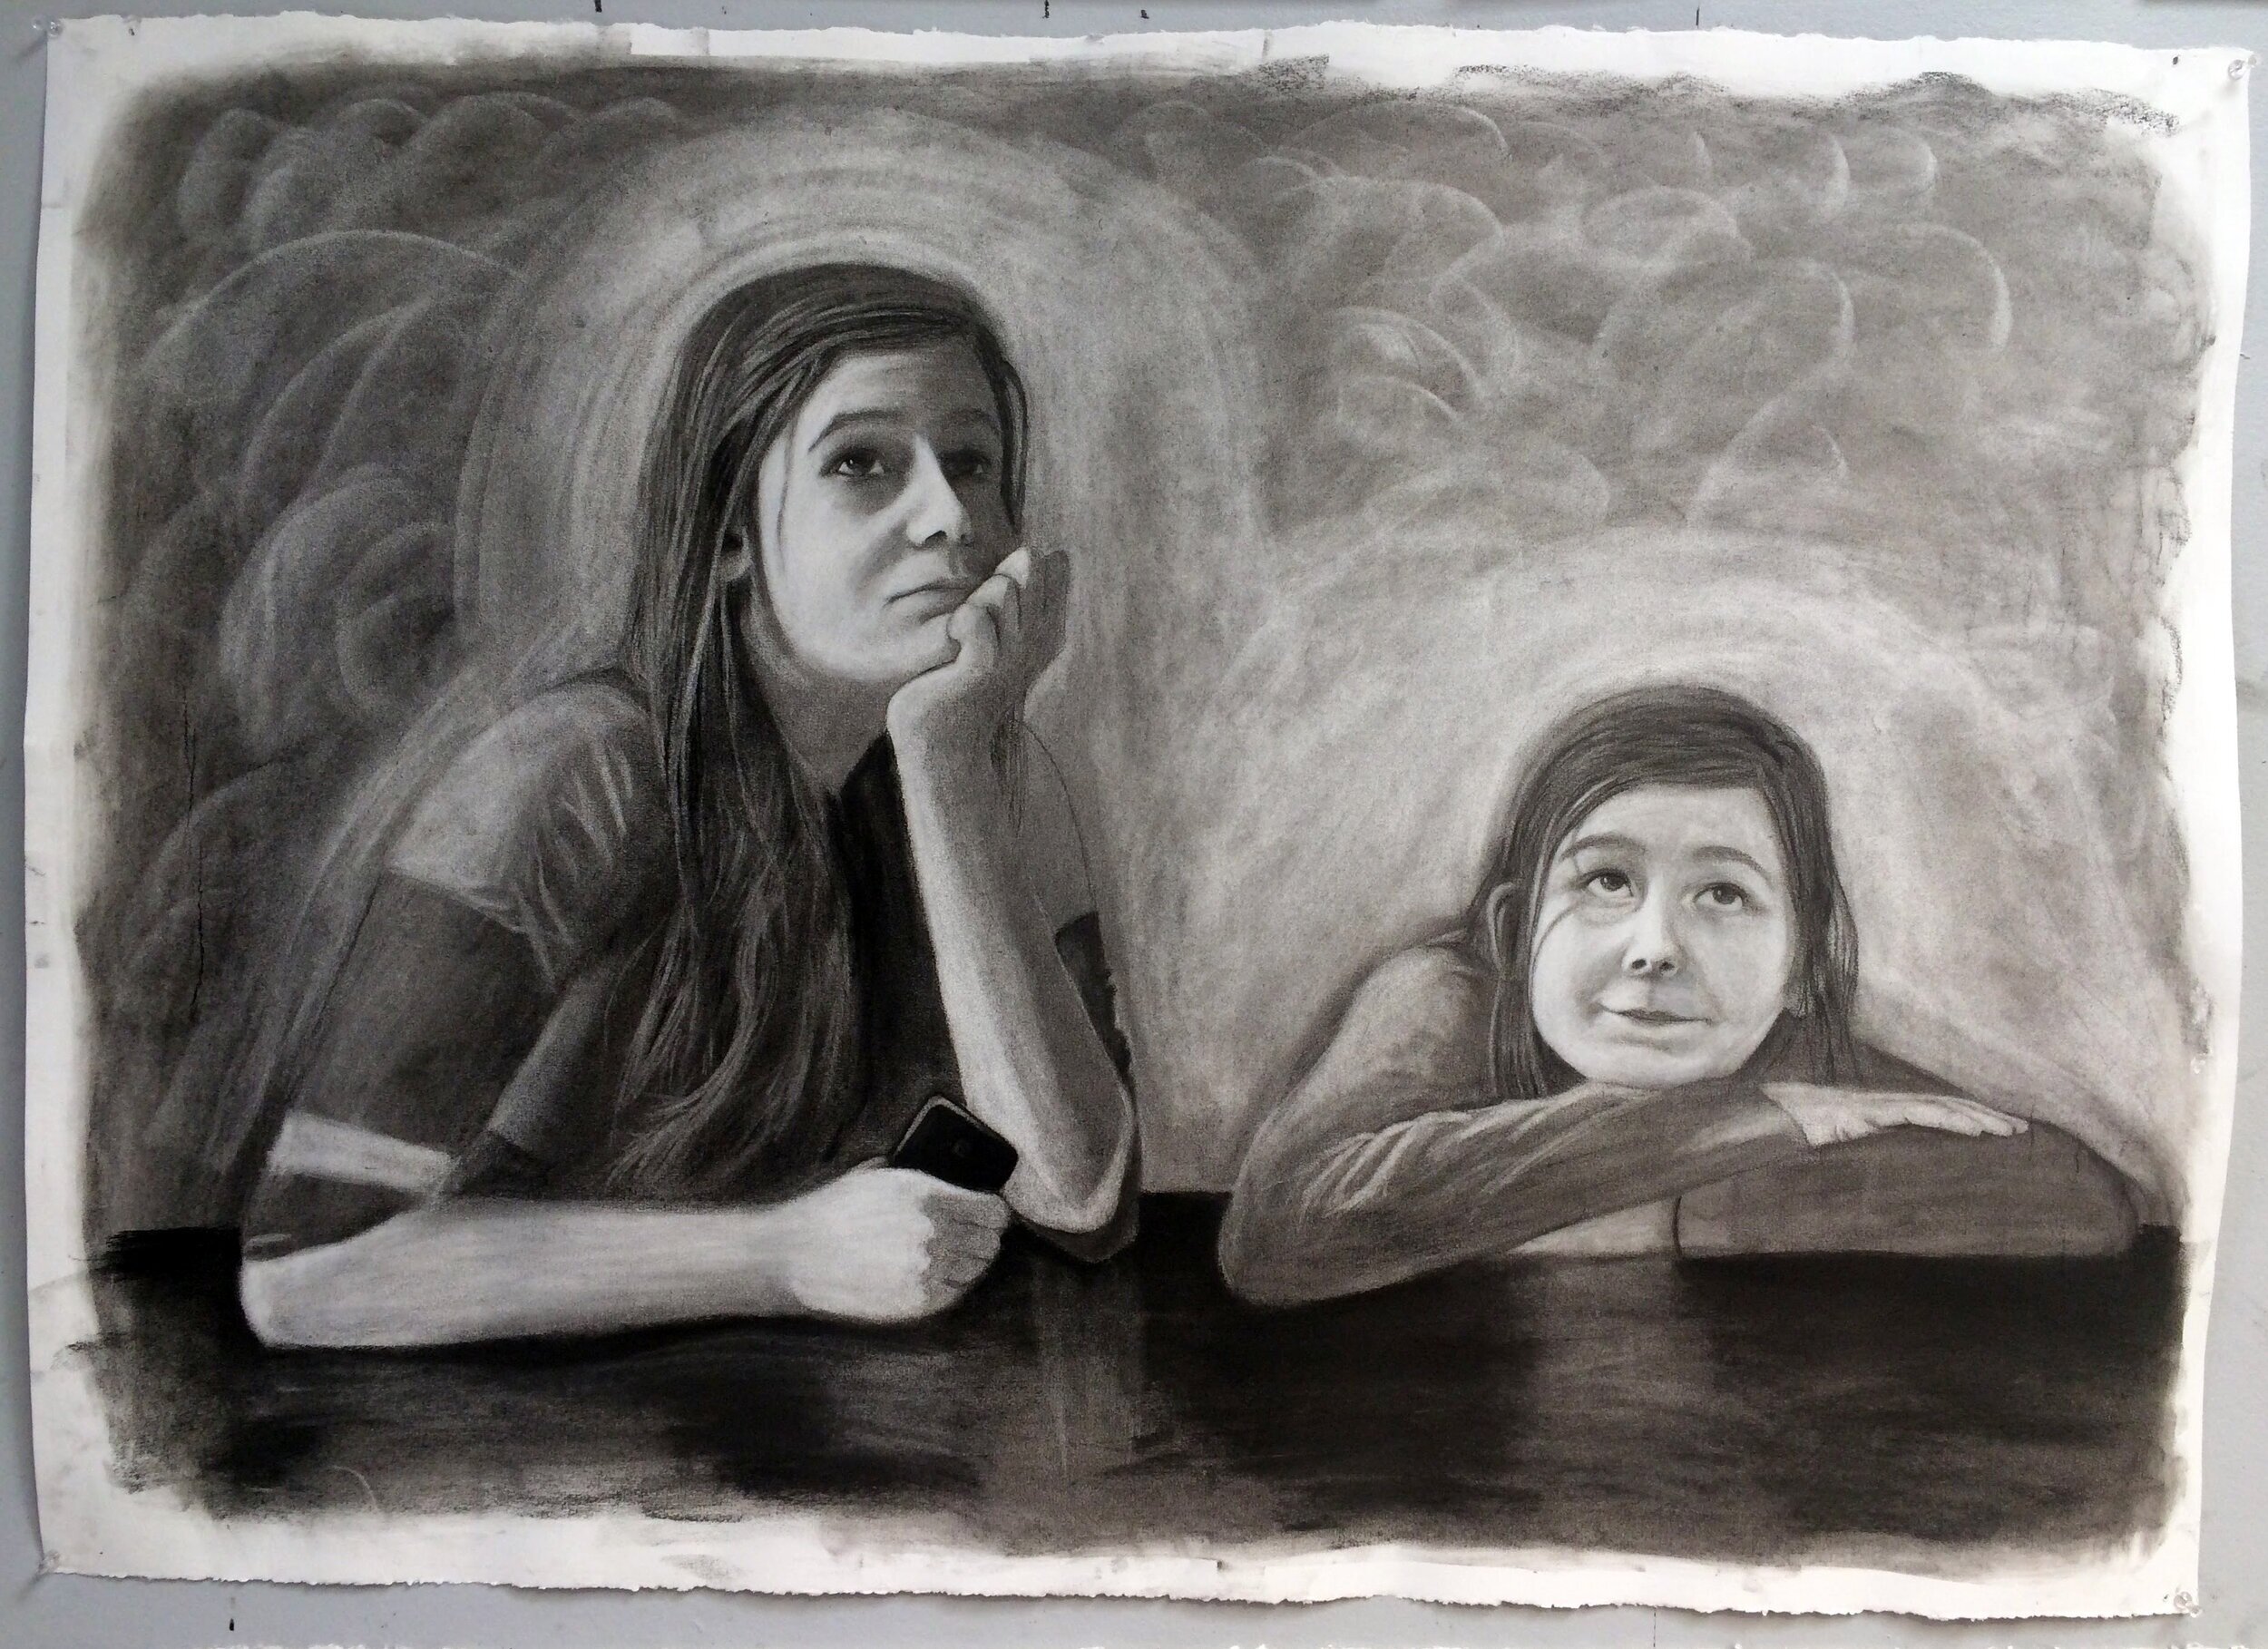  Jonah Feintuck,  Double Figure Study.  Charcoal on paper, 30 x 22 inches. Framingham State University, Spring 2016, ARTS 300: Life Drawing.  